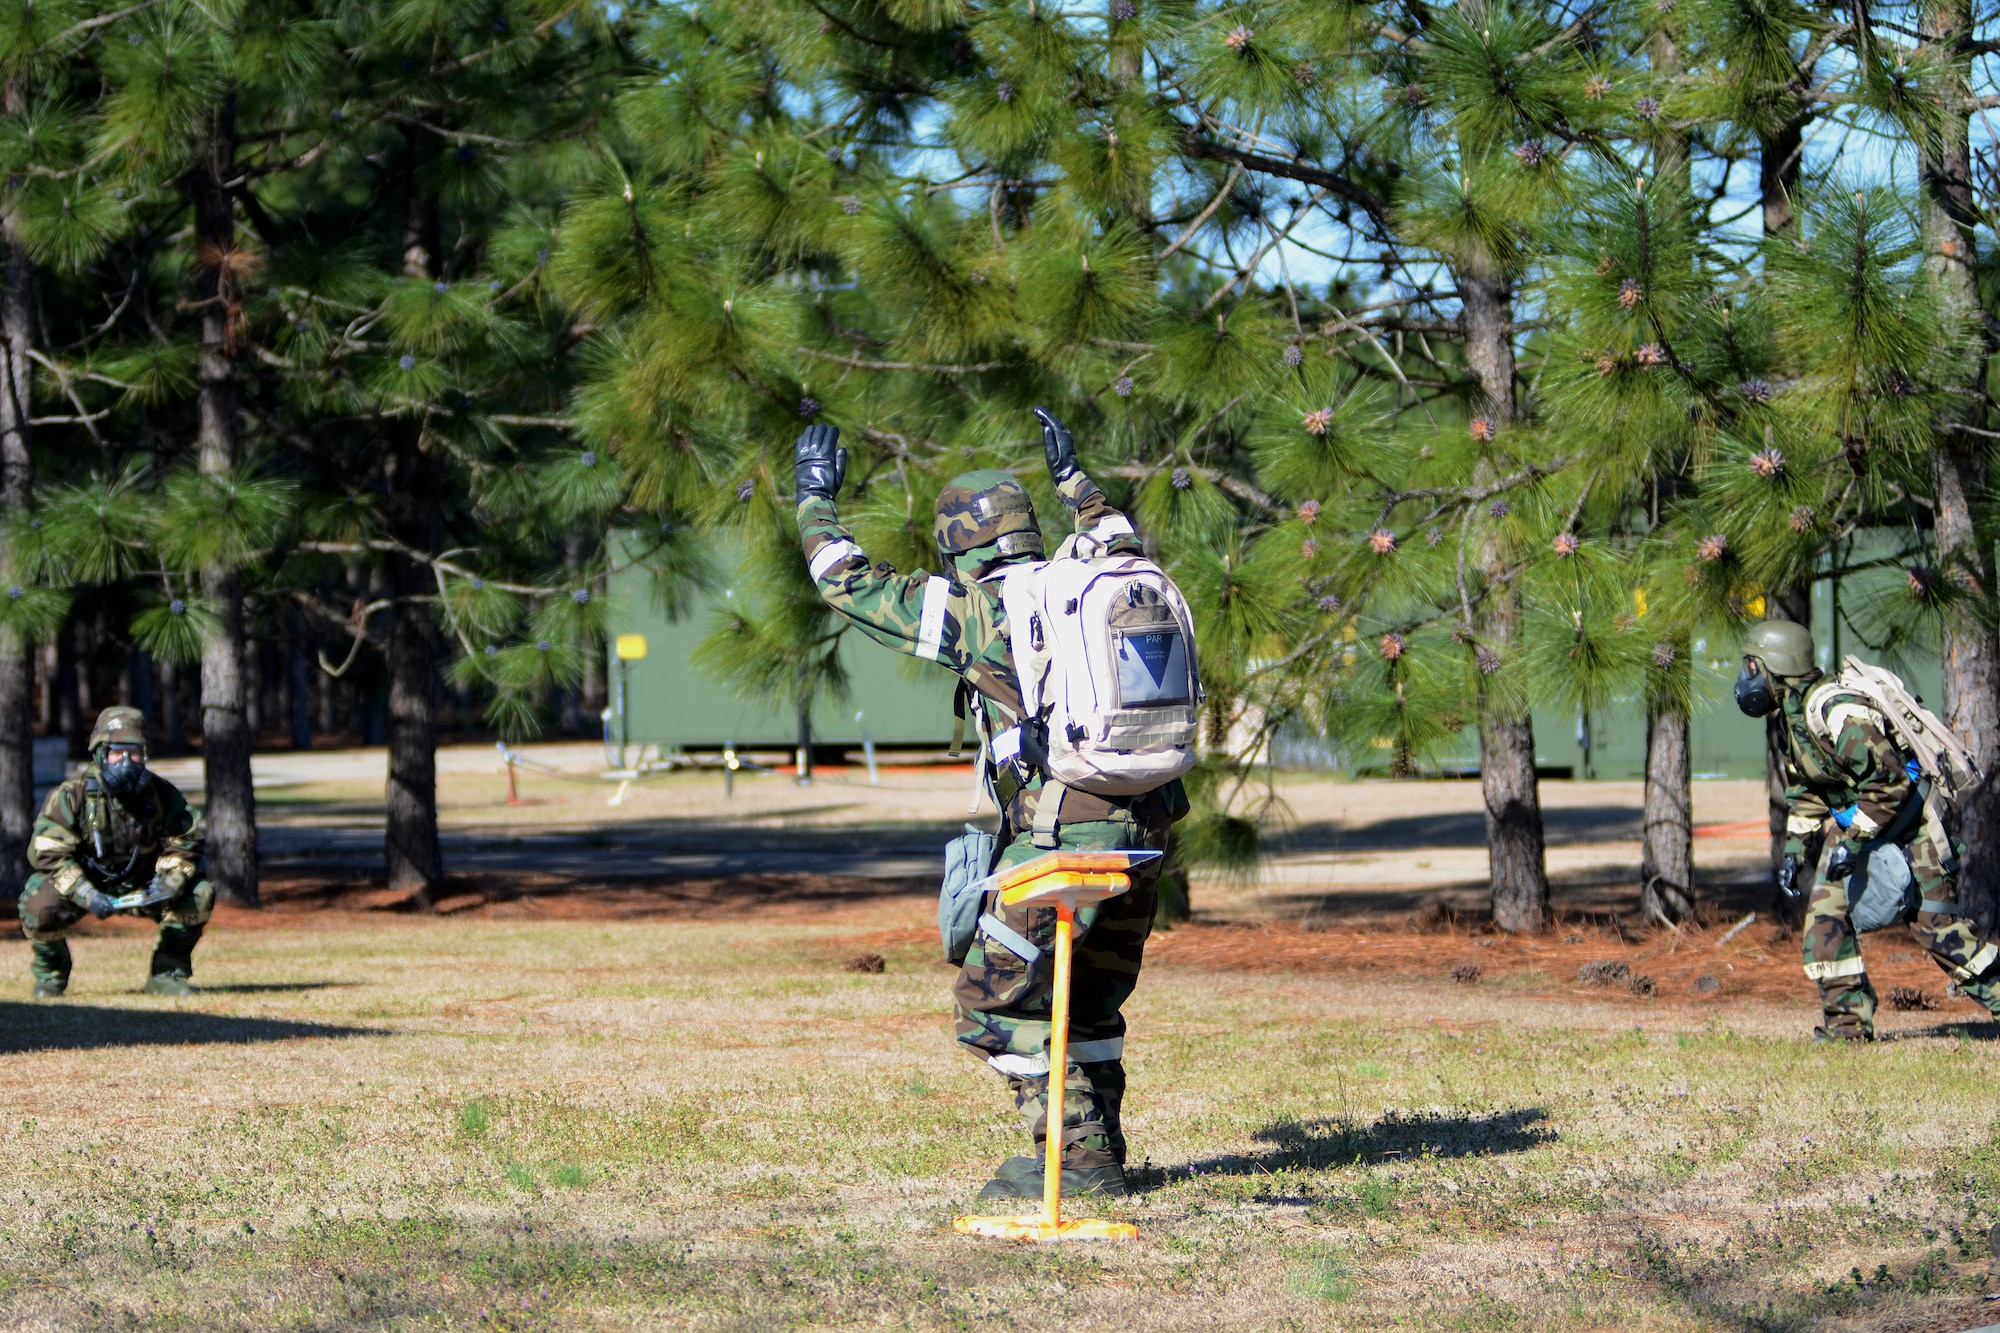 U.S. Air Force personnel with the 169th Fighter Wing at McEntire Joint National Guard Base, S.C., making up a three-person post attack reconnaissance (PAR) team, inspects the area surrounding a facility on base, March 15, 2013, after a simulated attack. A PAR team is designated for specific buildings and areas of the base to assess damage and survey the area for casualties, unexploded ordinances and chemical contamination after an attack. Personnel at McEntire are preparing for an upcoming Operational Readiness Inspection, which evaluates a unit's ability to operate and launch missions in a chemical combat environment.
(National Guard photo by Tech. Sgt. Caycee Watson/Released)
